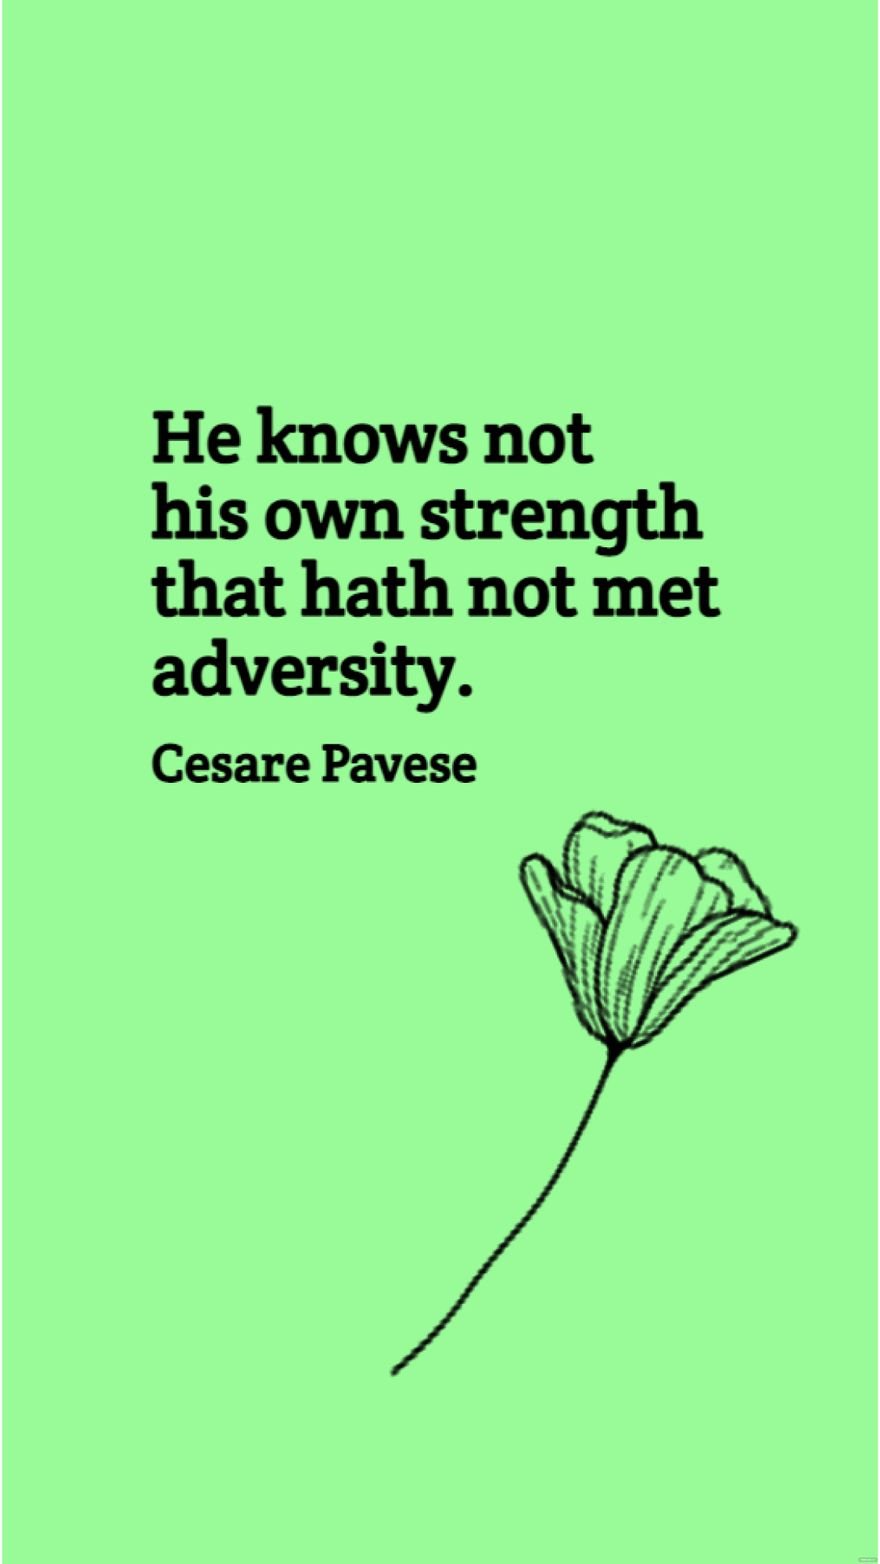 Cesare Pavese - He knows not his own strength that hath not met adversity.